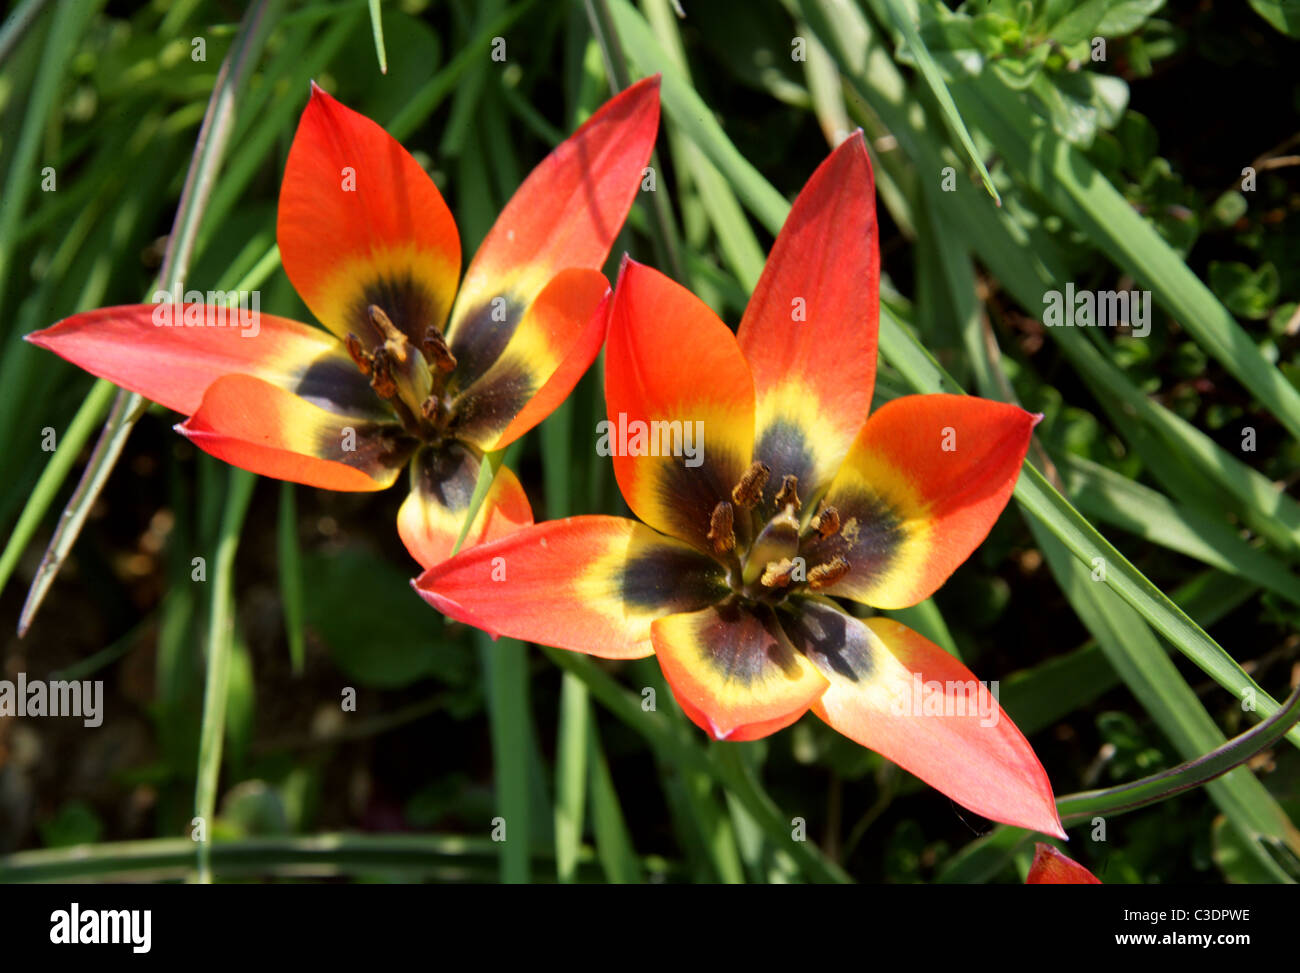 Red Tulips, Liliaceae. Stock Photo